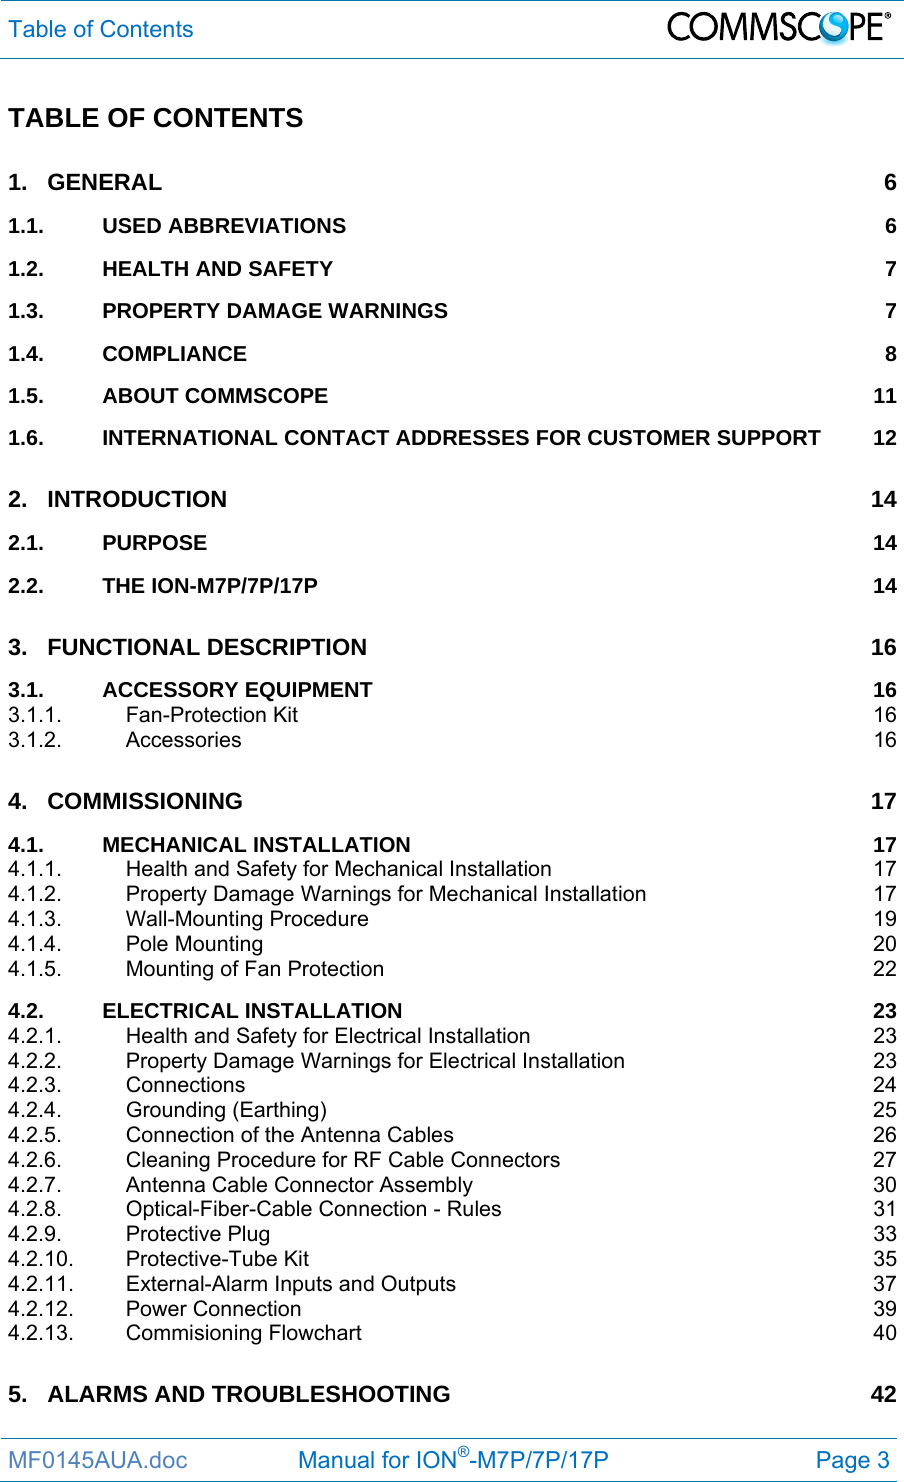 Table of Contents  MF0145AUA.doc                 Manual for ION®-M7P/7P/17P Page 3 TABLE OF CONTENTS 1.GENERAL 61.1.USED ABBREVIATIONS  61.2.HEALTH AND SAFETY  71.3.PROPERTY DAMAGE WARNINGS  71.4.COMPLIANCE 81.5.ABOUT COMMSCOPE  111.6.INTERNATIONAL CONTACT ADDRESSES FOR CUSTOMER SUPPORT  122.INTRODUCTION 142.1.PURPOSE 142.2.THE ION-M7P/7P/17P  143.FUNCTIONAL DESCRIPTION  163.1.ACCESSORY EQUIPMENT  163.1.1.Fan-Protection Kit  163.1.2.Accessories 164.COMMISSIONING 174.1.MECHANICAL INSTALLATION  174.1.1.Health and Safety for Mechanical Installation  174.1.2.Property Damage Warnings for Mechanical Installation  174.1.3.Wall-Mounting Procedure  194.1.4.Pole Mounting  204.1.5.Mounting of Fan Protection  224.2.ELECTRICAL INSTALLATION  234.2.1.Health and Safety for Electrical Installation  234.2.2.Property Damage Warnings for Electrical Installation  234.2.3.Connections 244.2.4.Grounding (Earthing)  254.2.5.Connection of the Antenna Cables  264.2.6.Cleaning Procedure for RF Cable Connectors  274.2.7.Antenna Cable Connector Assembly  304.2.8.Optical-Fiber-Cable Connection - Rules  314.2.9.Protective Plug  334.2.10.Protective-Tube Kit  354.2.11.External-Alarm Inputs and Outputs  374.2.12.Power Connection  394.2.13.Commisioning Flowchart  405.ALARMS AND TROUBLESHOOTING  42